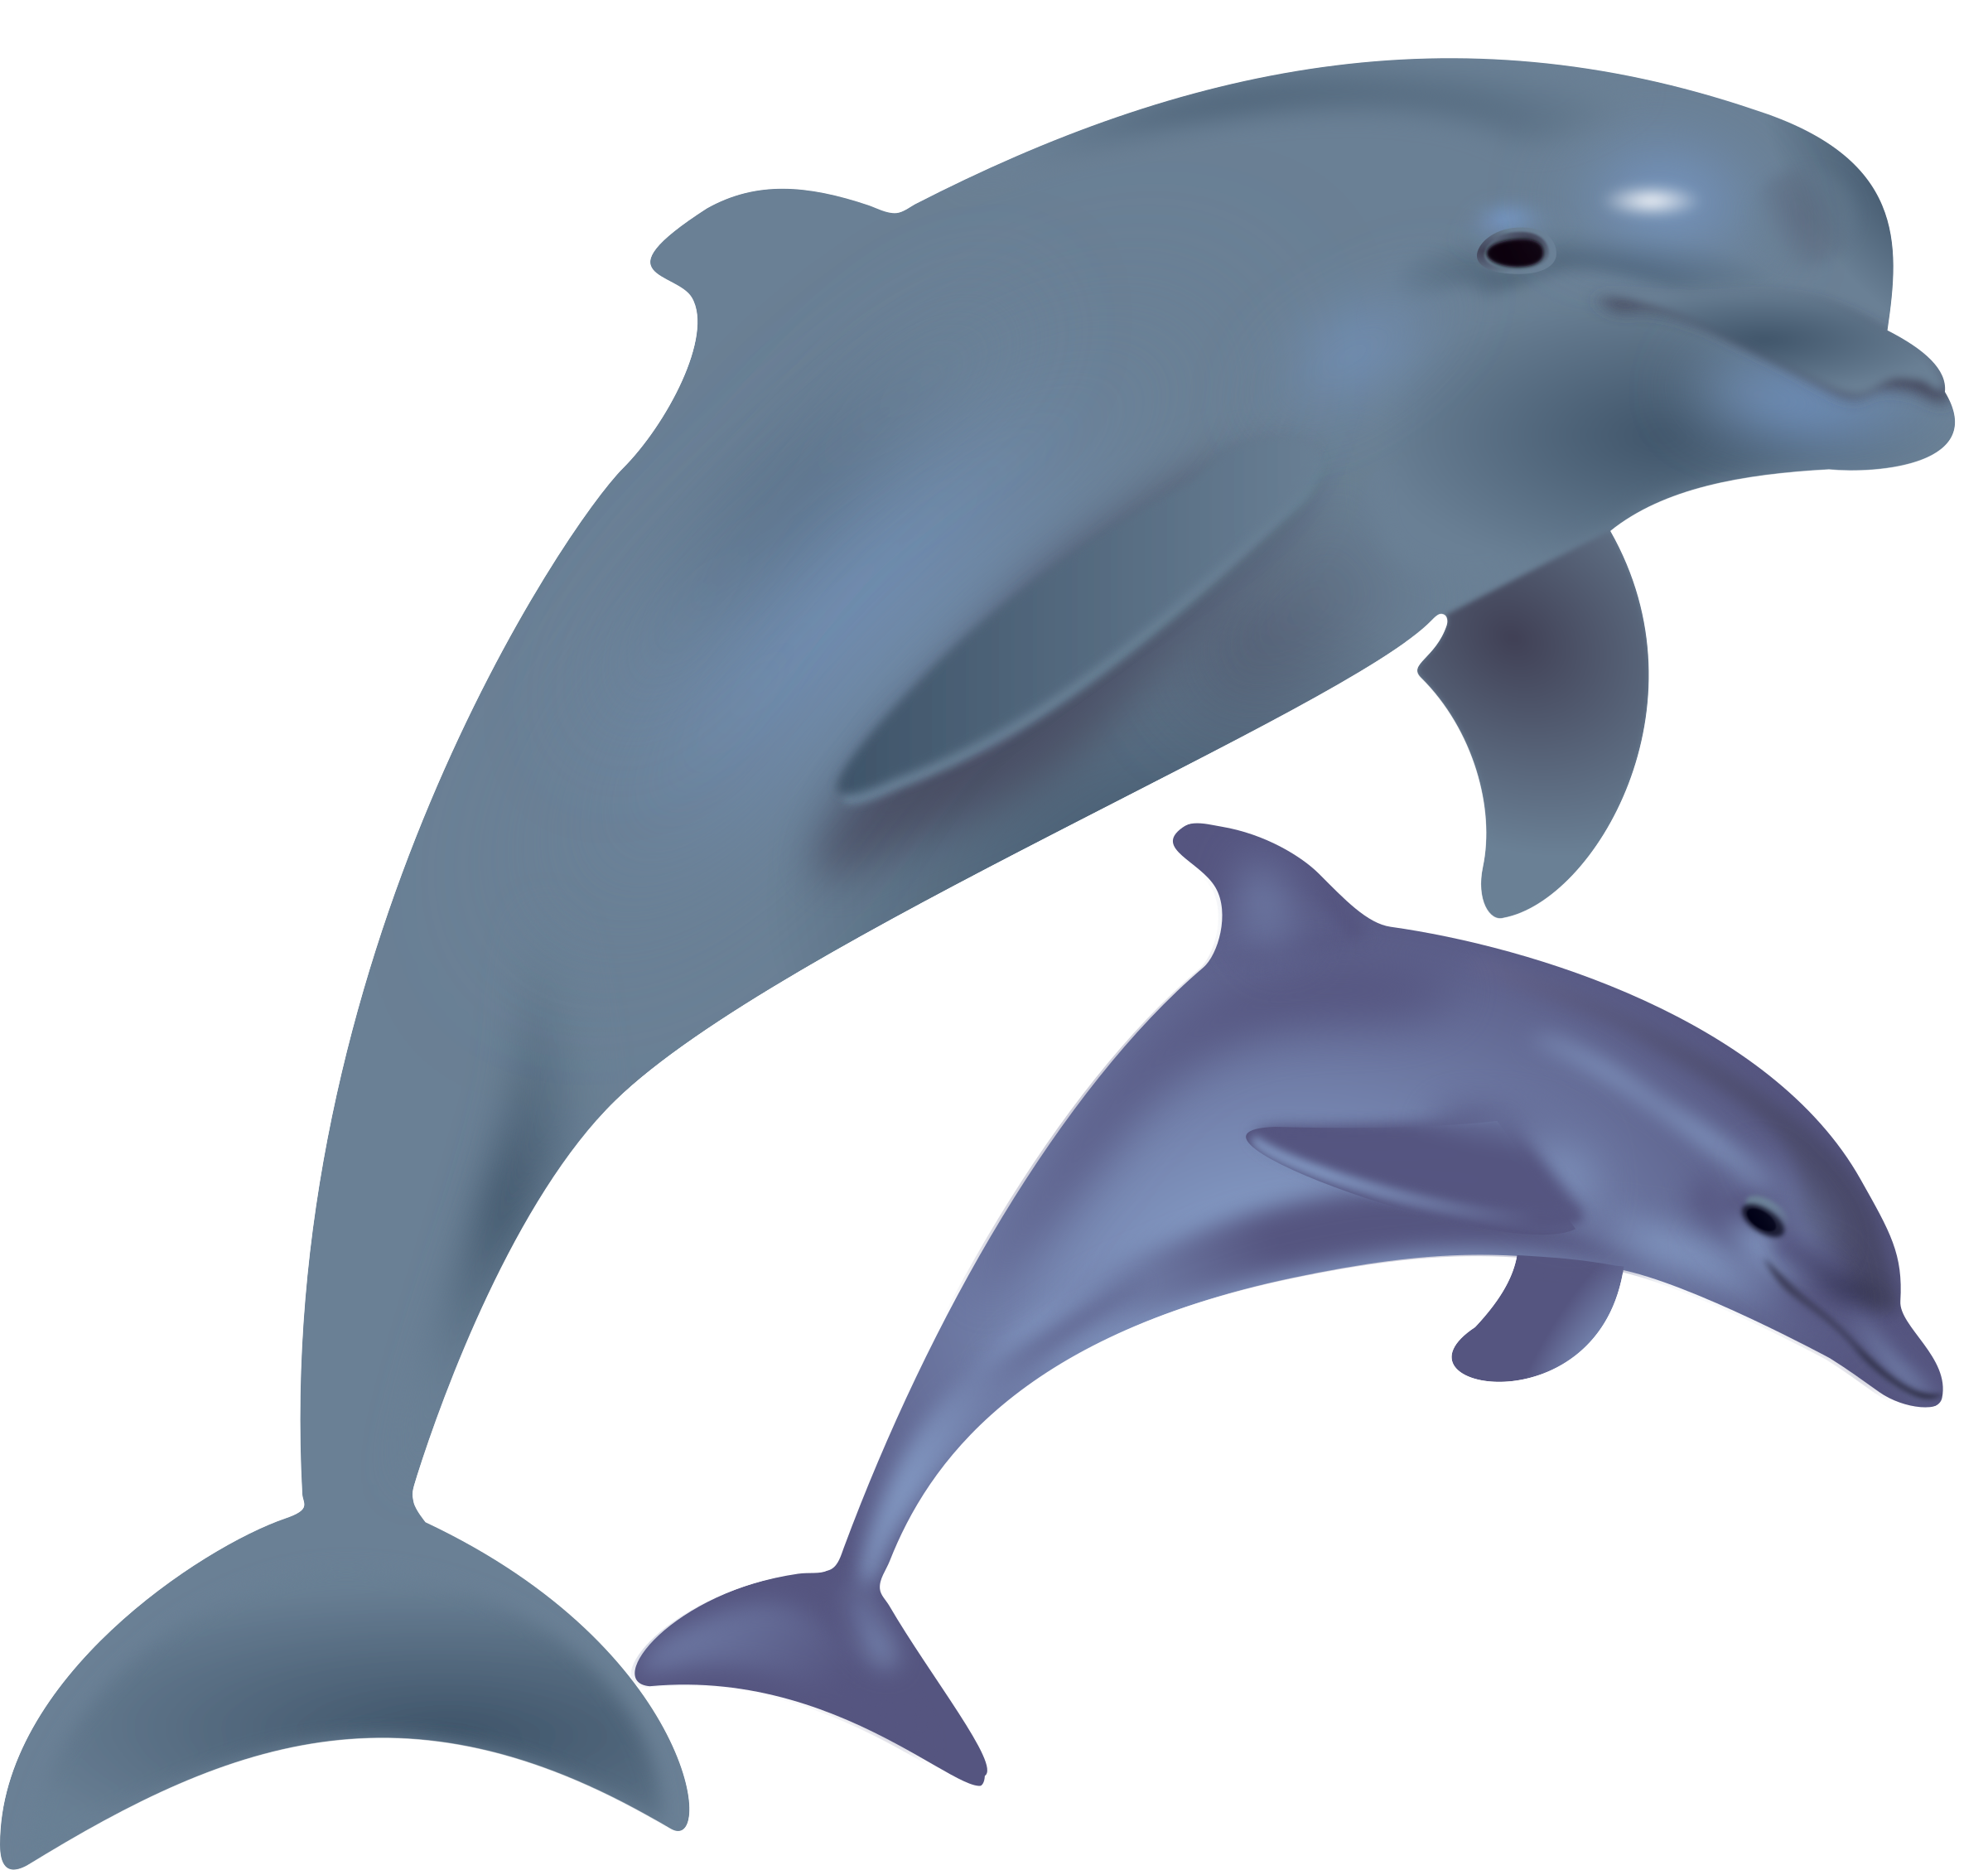 Dolphins Vector Clipart image Free stock photo Public Domain photo CC0 Images